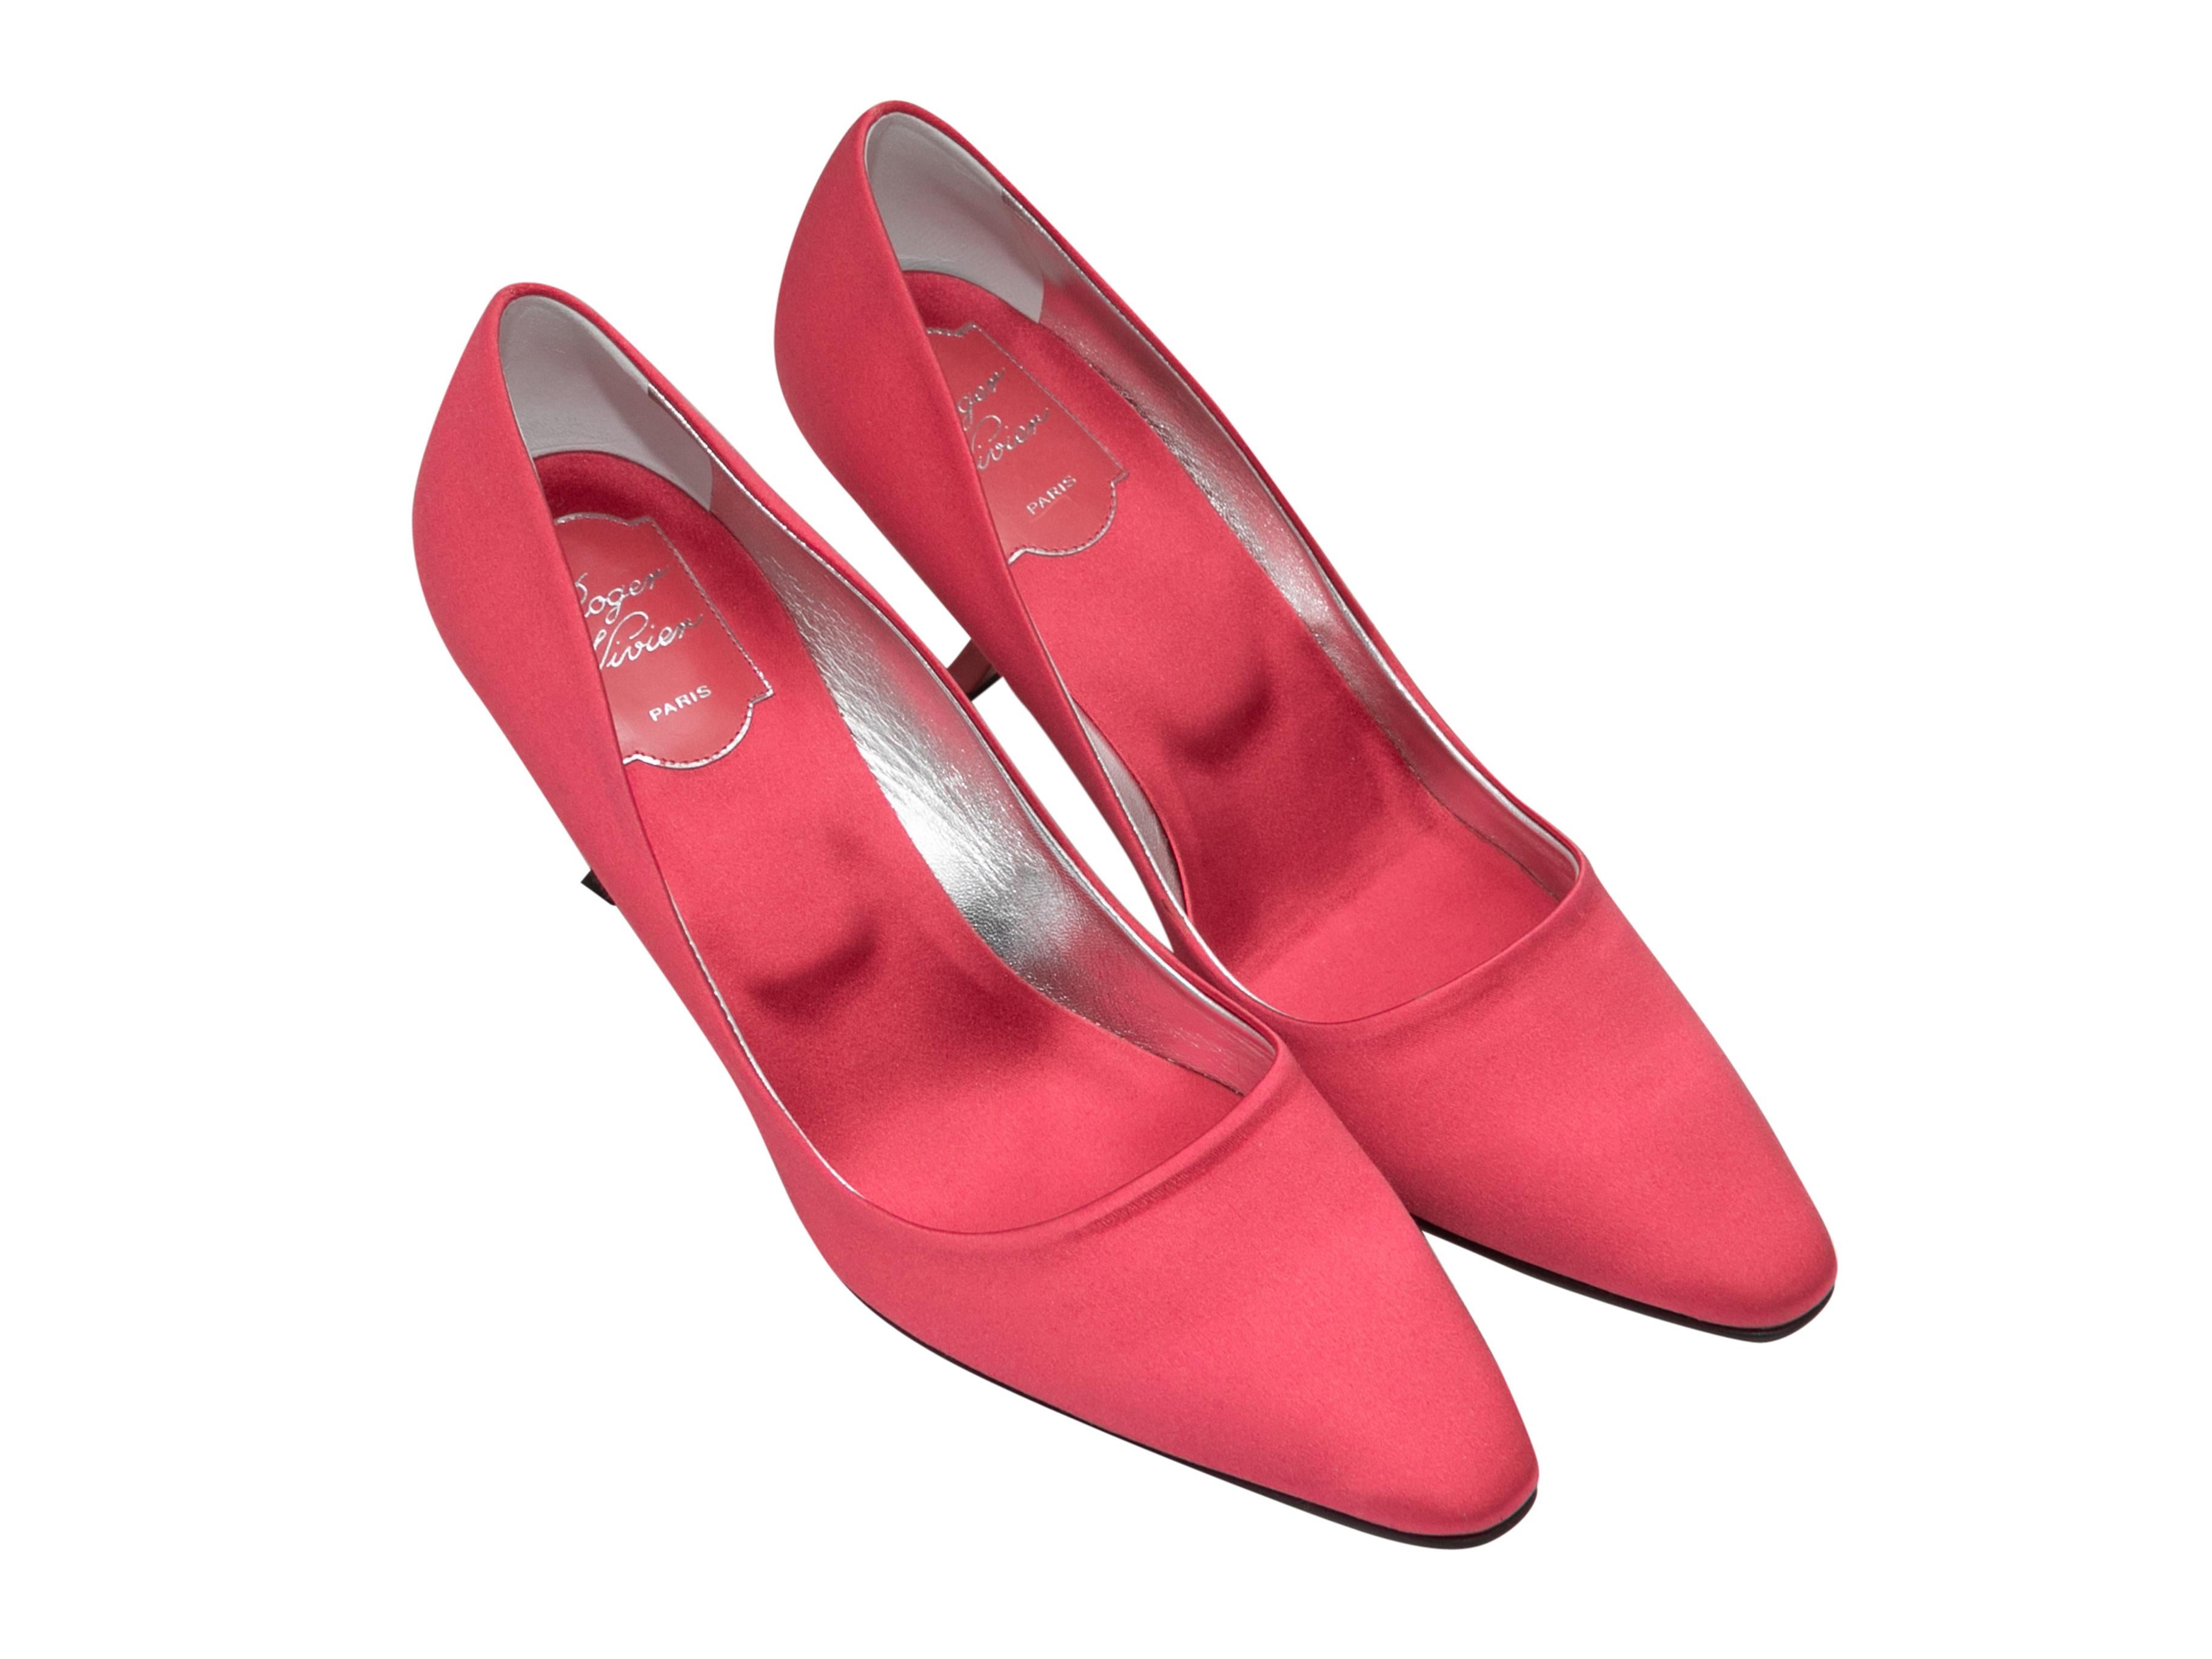 Pink satin pointed-toe pumps by Roger Vivier. Comma heels. 3